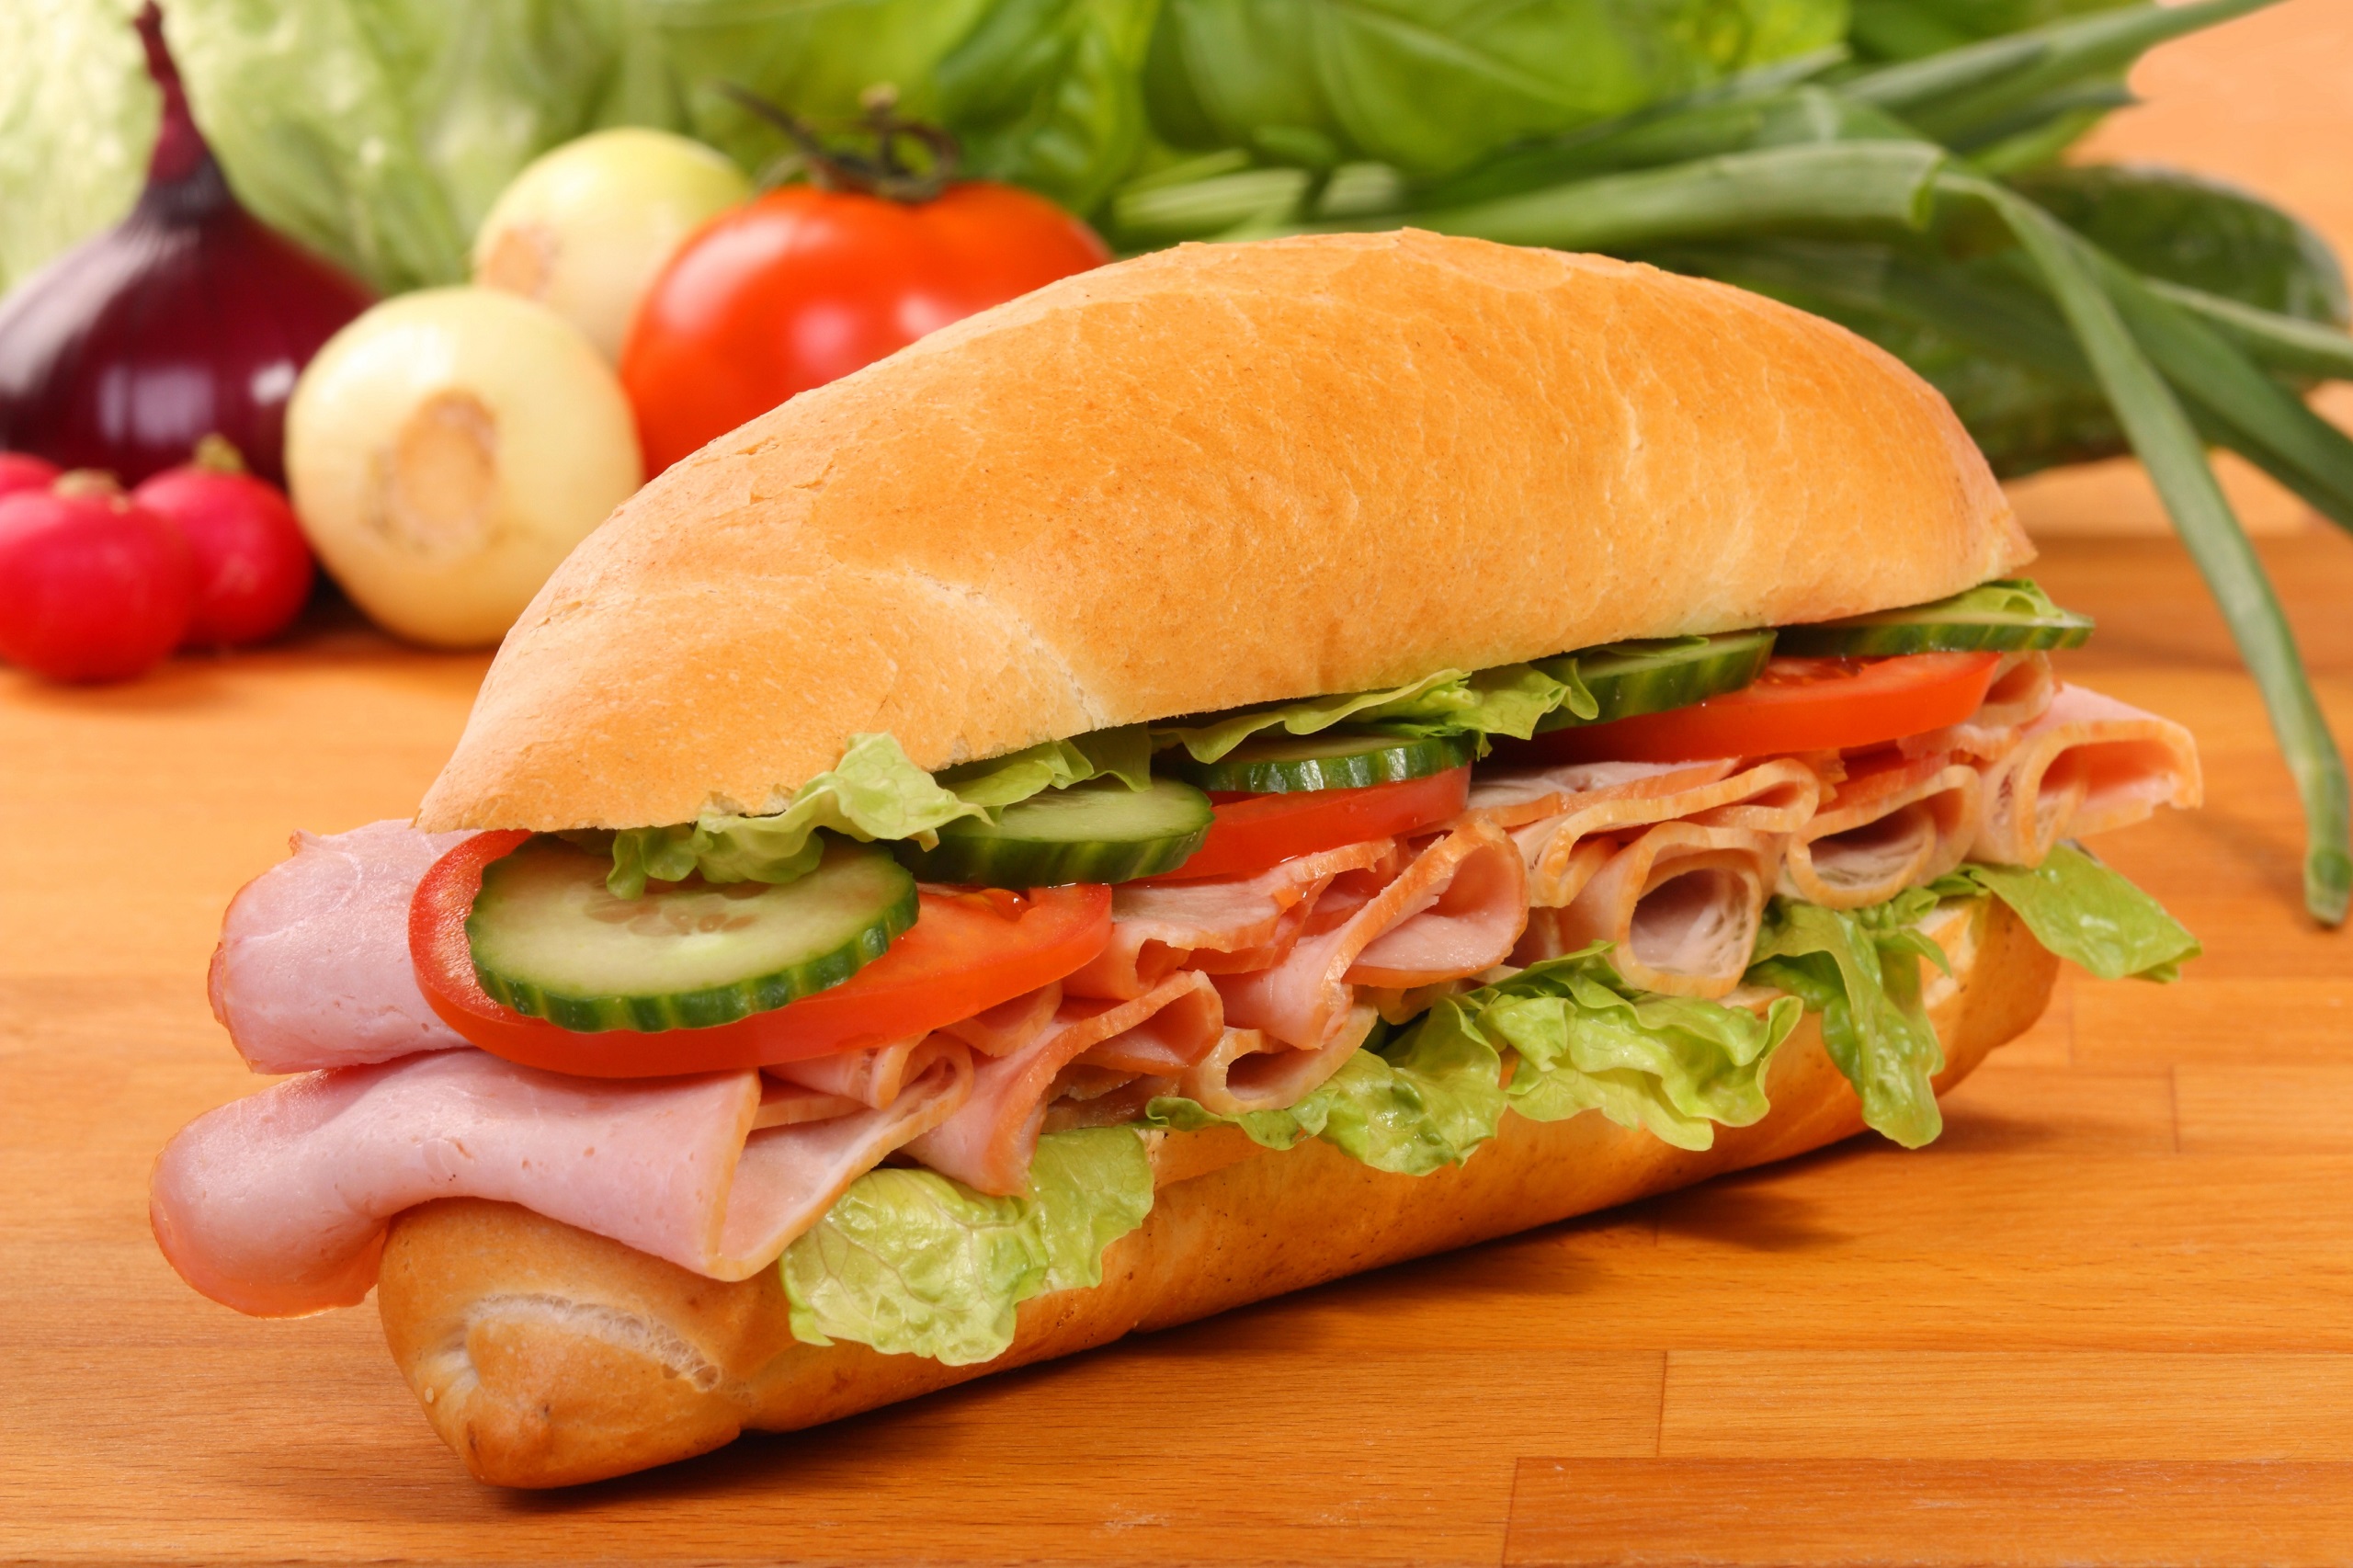 Delicious fresh gourmet sandwich packed with off the bone ham, swiss cheese, lettuce, tomatoes, cucumbers, and other vegetables on a wooden tray.